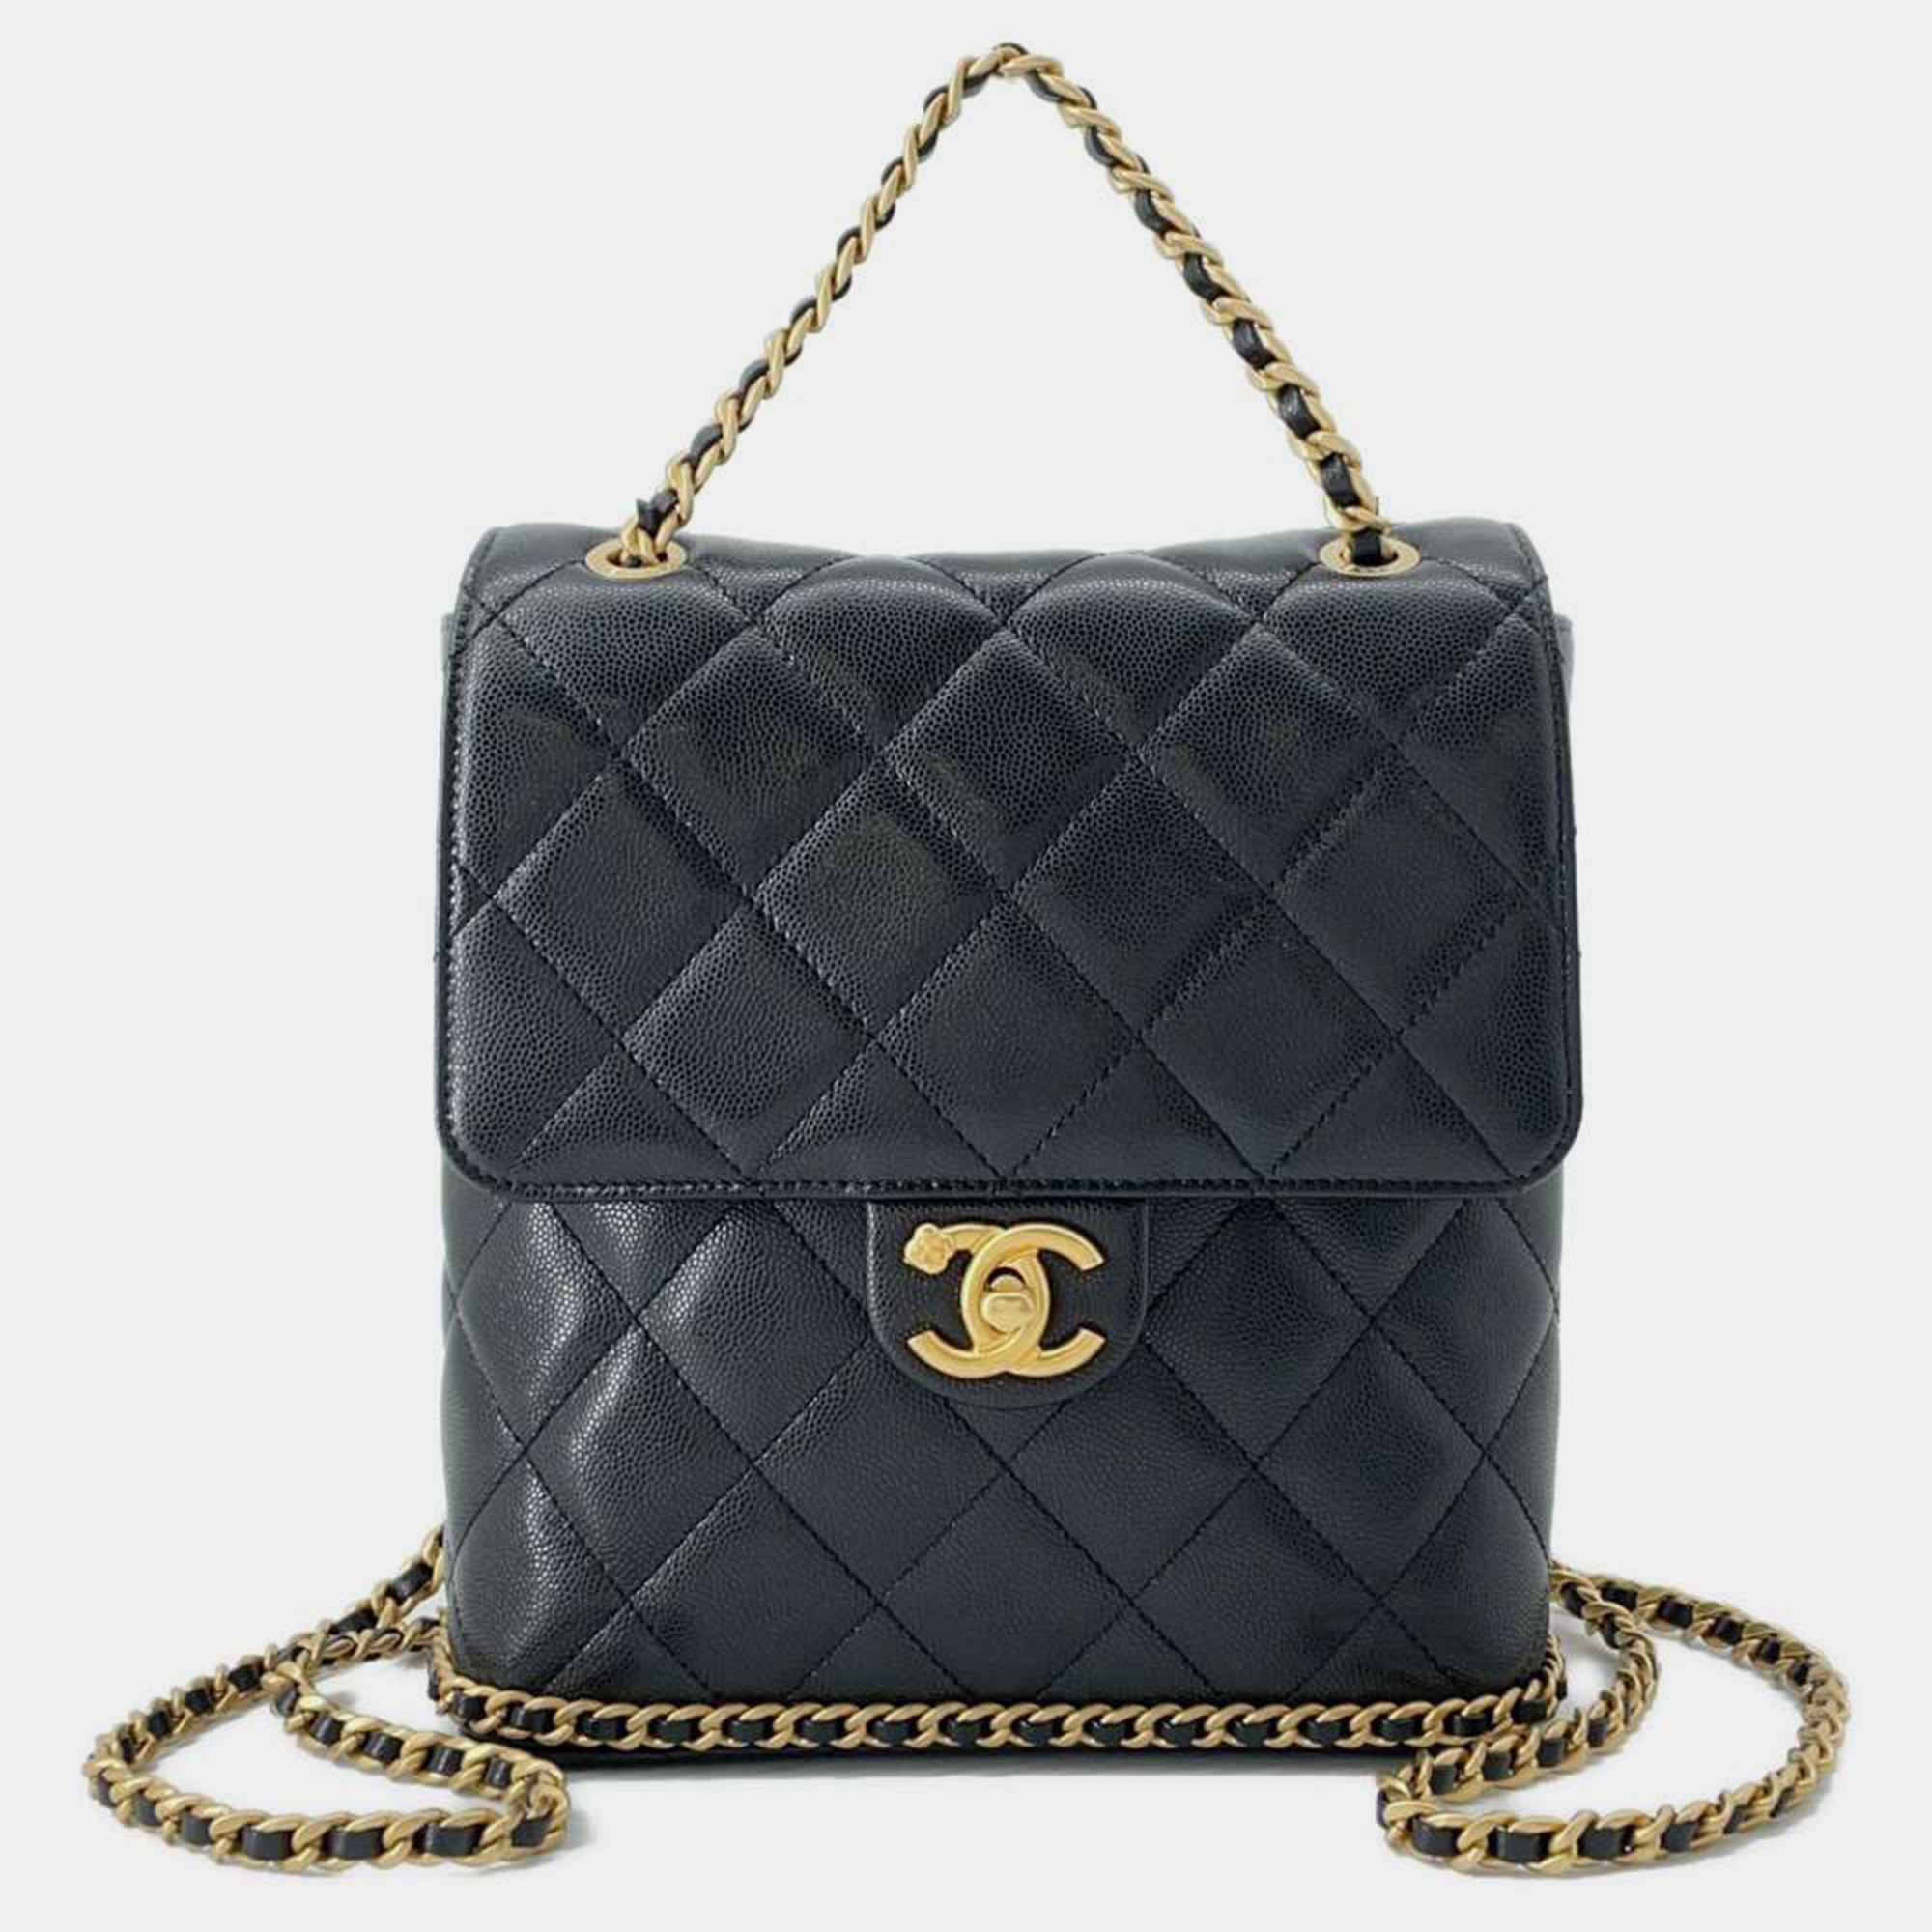 Pre-owned Chanel Black Caviar Leather Matelasse Daypack Bag